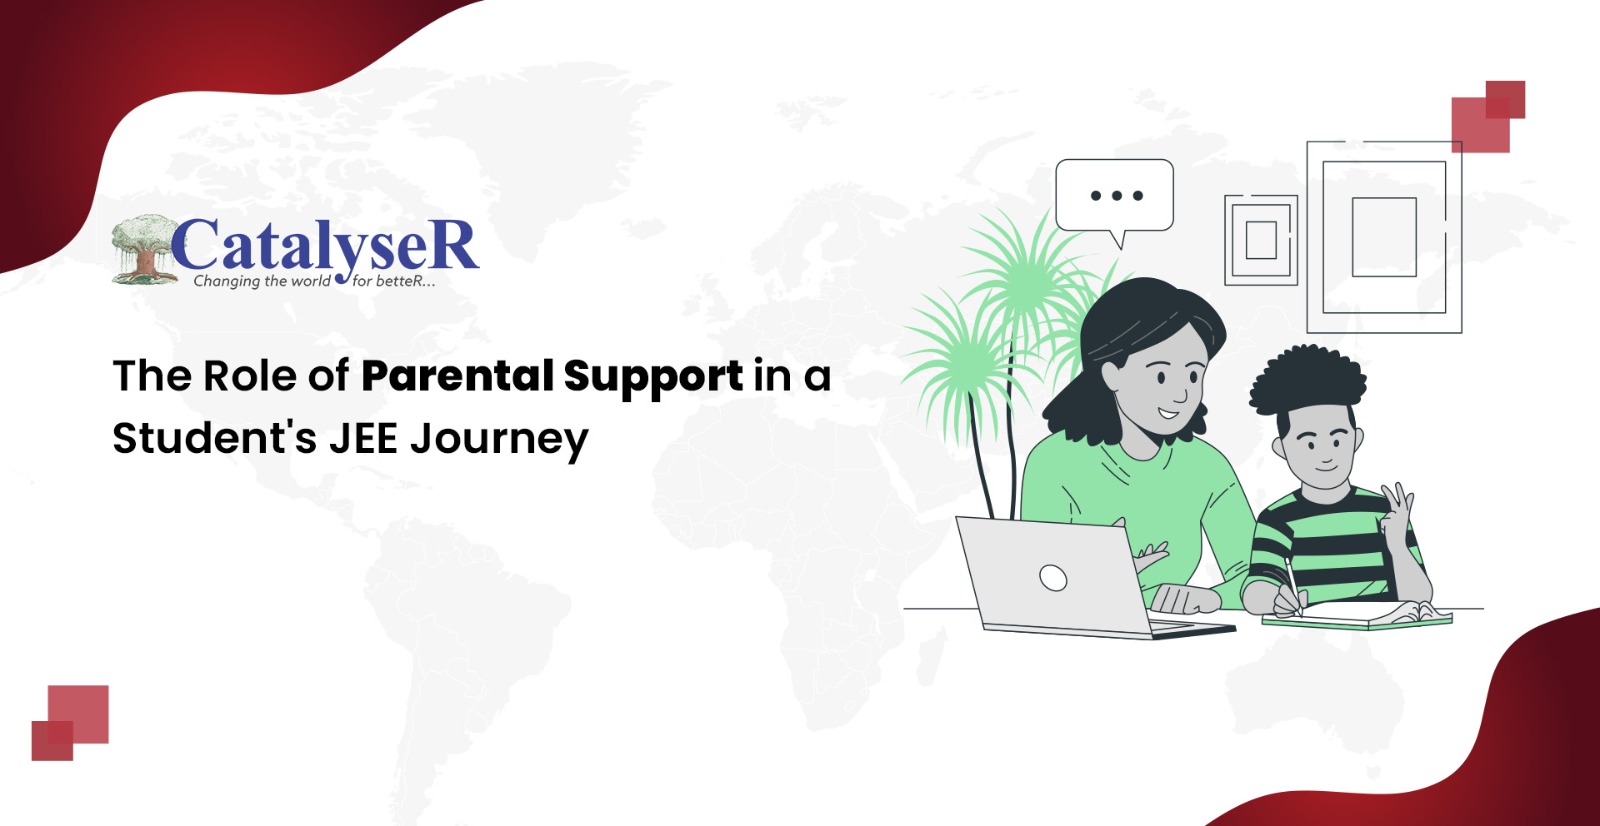 The Role of Parental Support in a Student's JEE Journey